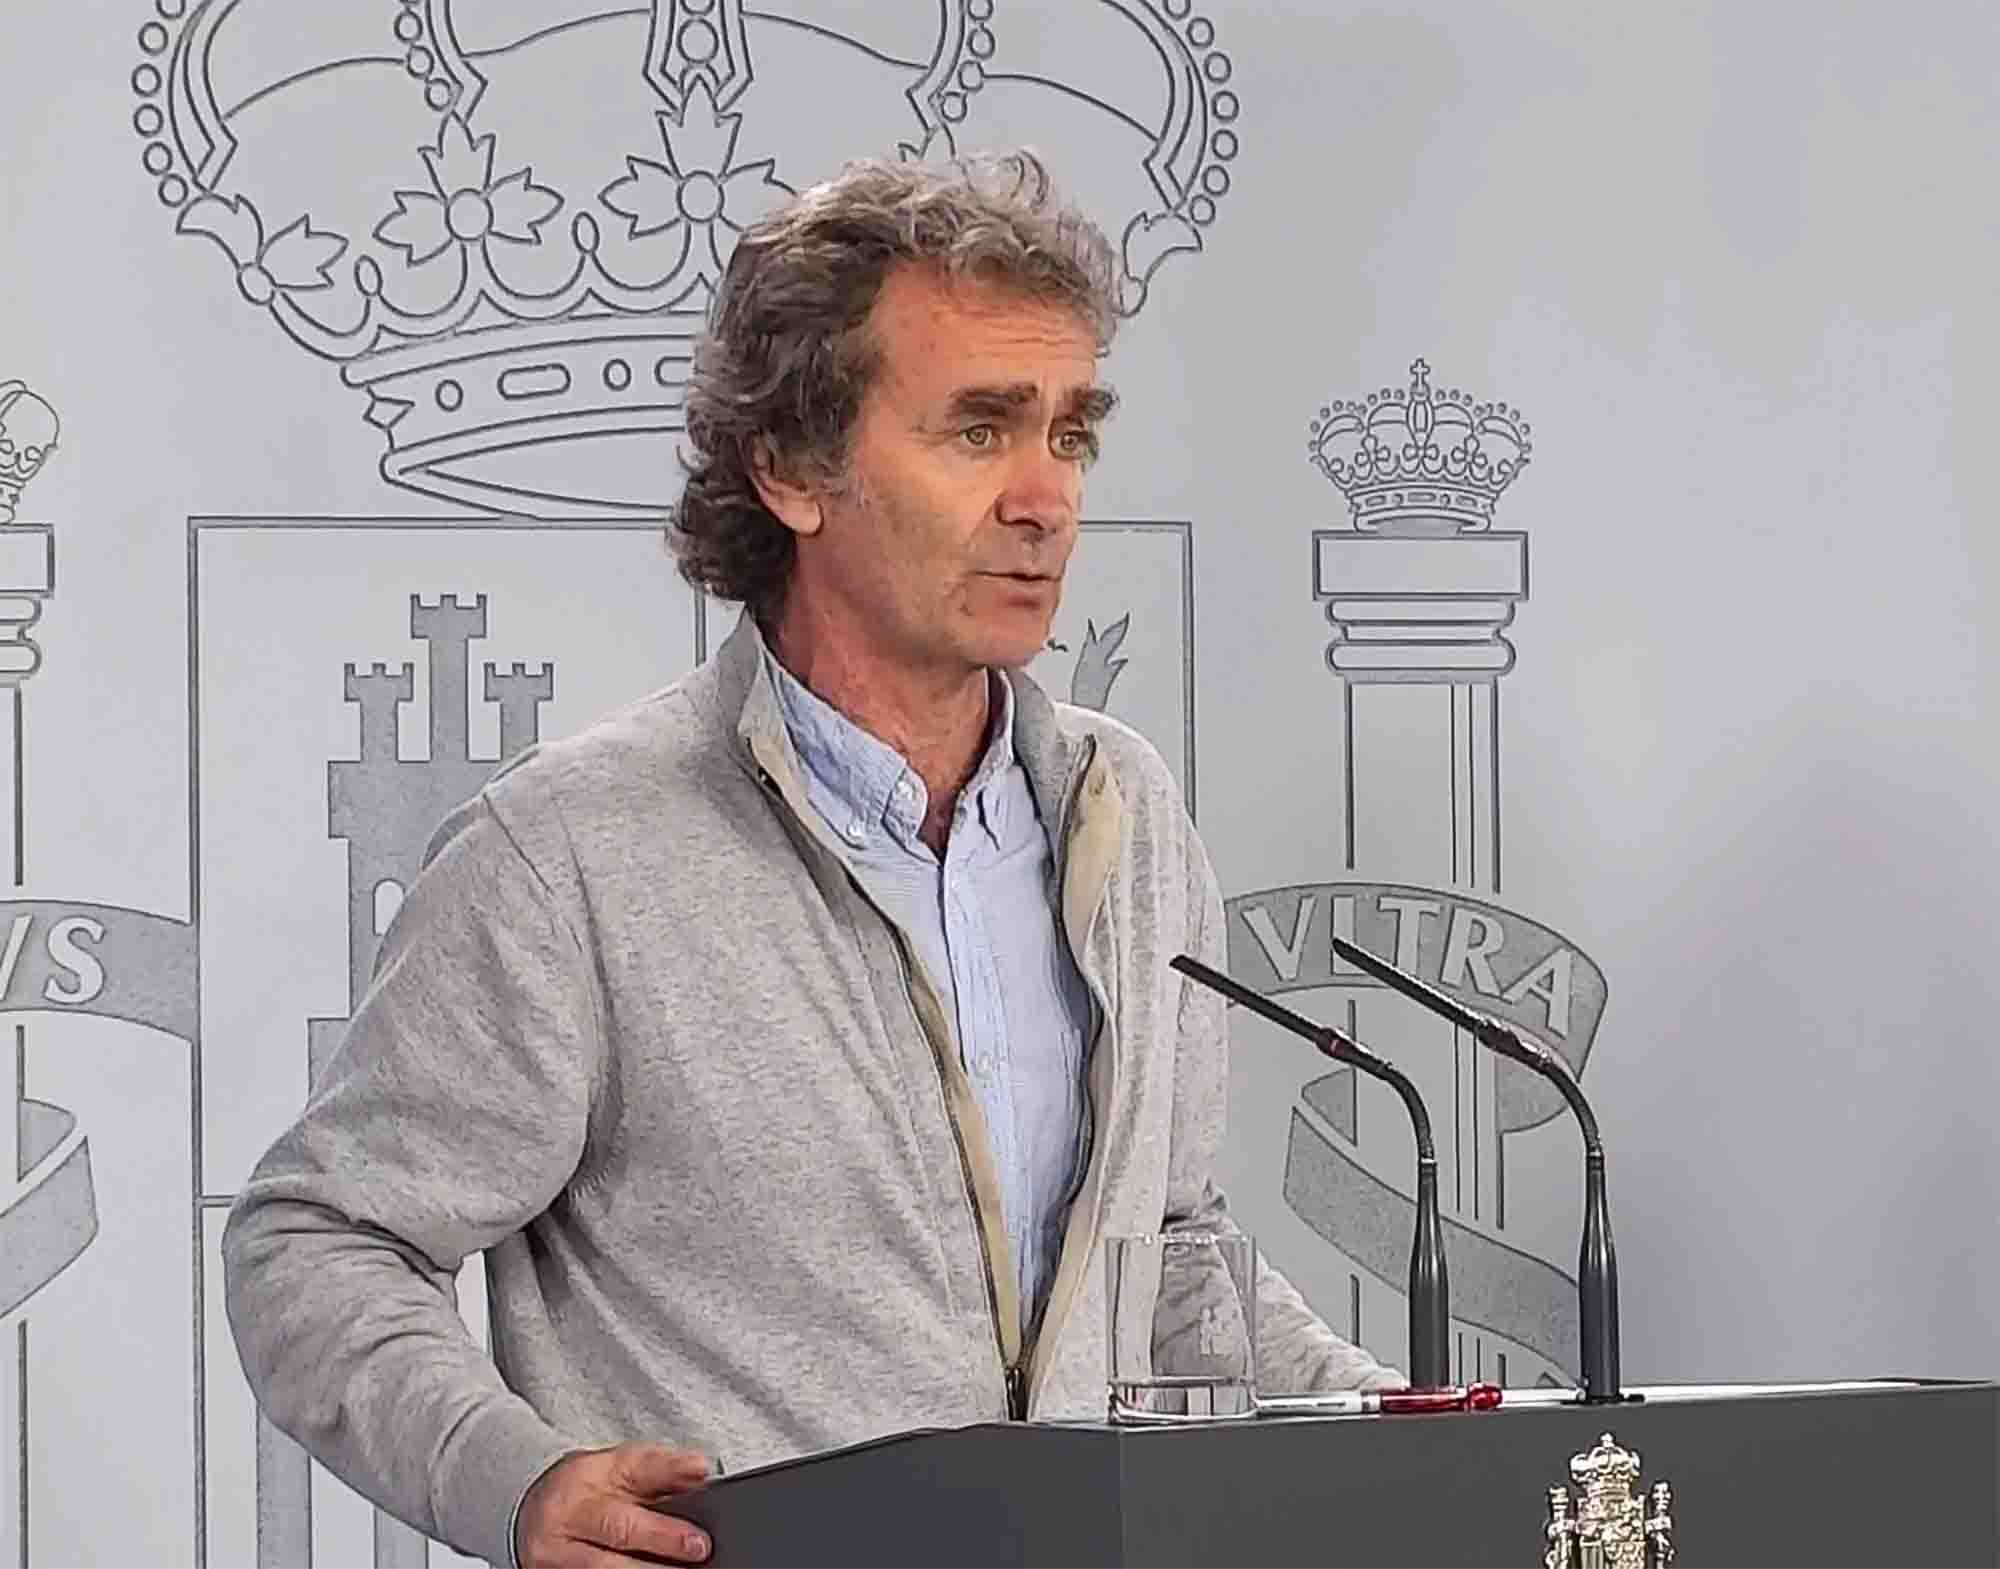 Madrid (Spain), 27/04/2020.- A handout photo made available by the Spanish Government of a tv grab showing Fernando Simon, director of Spain's Center for Coordination of Health Alerts and Emergencies (CCAES), speaking during a press conference after the meeting of the Coronavirus Evaluation and Follow-up Committee on the ongoing coronavirus COVID-19 pandemic at Moncloa Presidential Palace in Madrid, Spain, 27 April 2020. Spain is under lockdown in an attempt to fight the spread of the pandemic COVID-19 disease caused by the SARS-CoV-2 coronavirus. (España) EFE/EPA/SPANISH GOVERNMENT HANDOUT HANDOUT EDITORIAL USE ONLY/NO SALES
